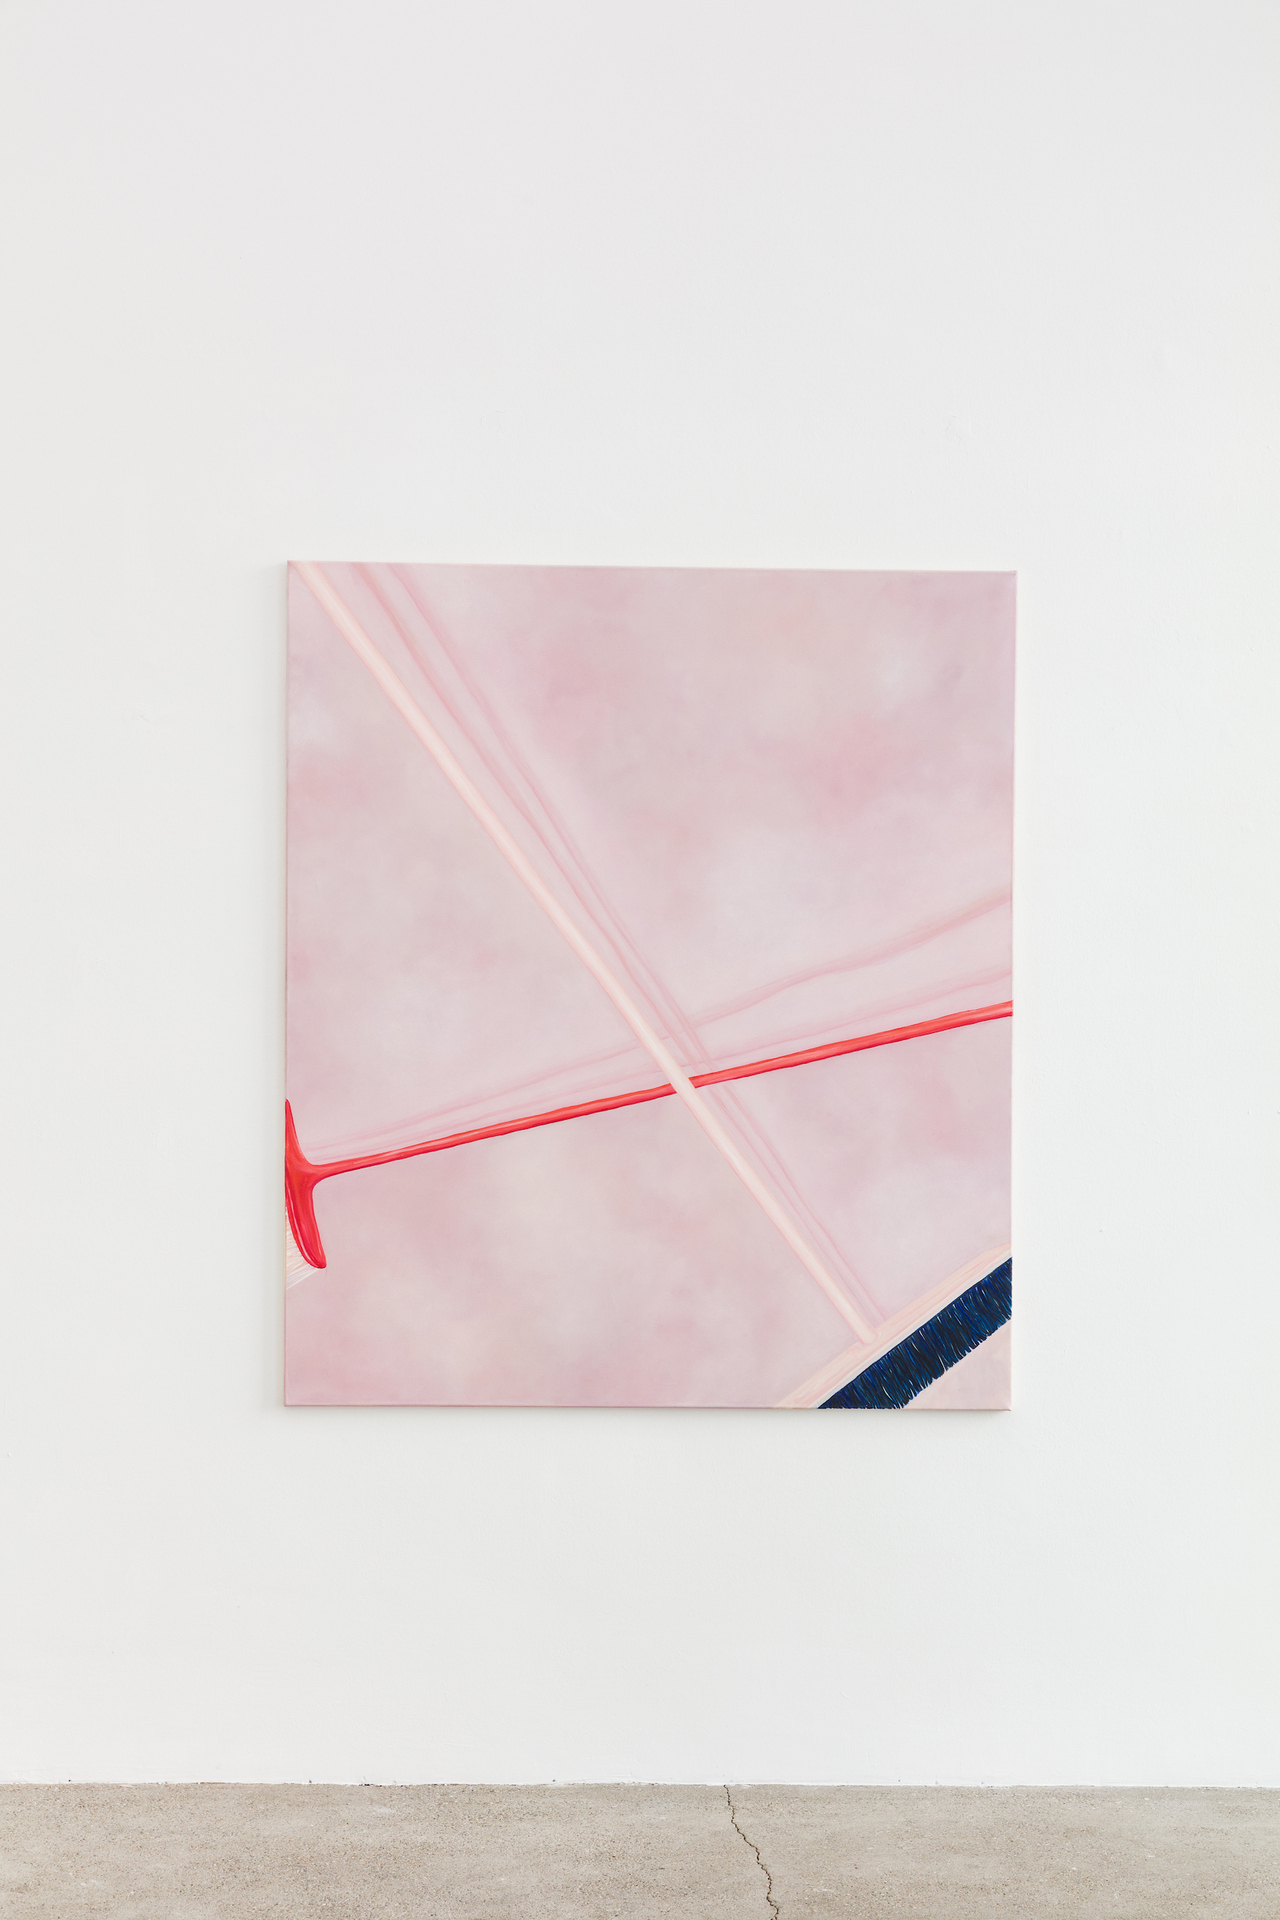 Sarah Bechter, Untitled (I own two brooms), 2019, oil on canvas, 150 x 130 cm